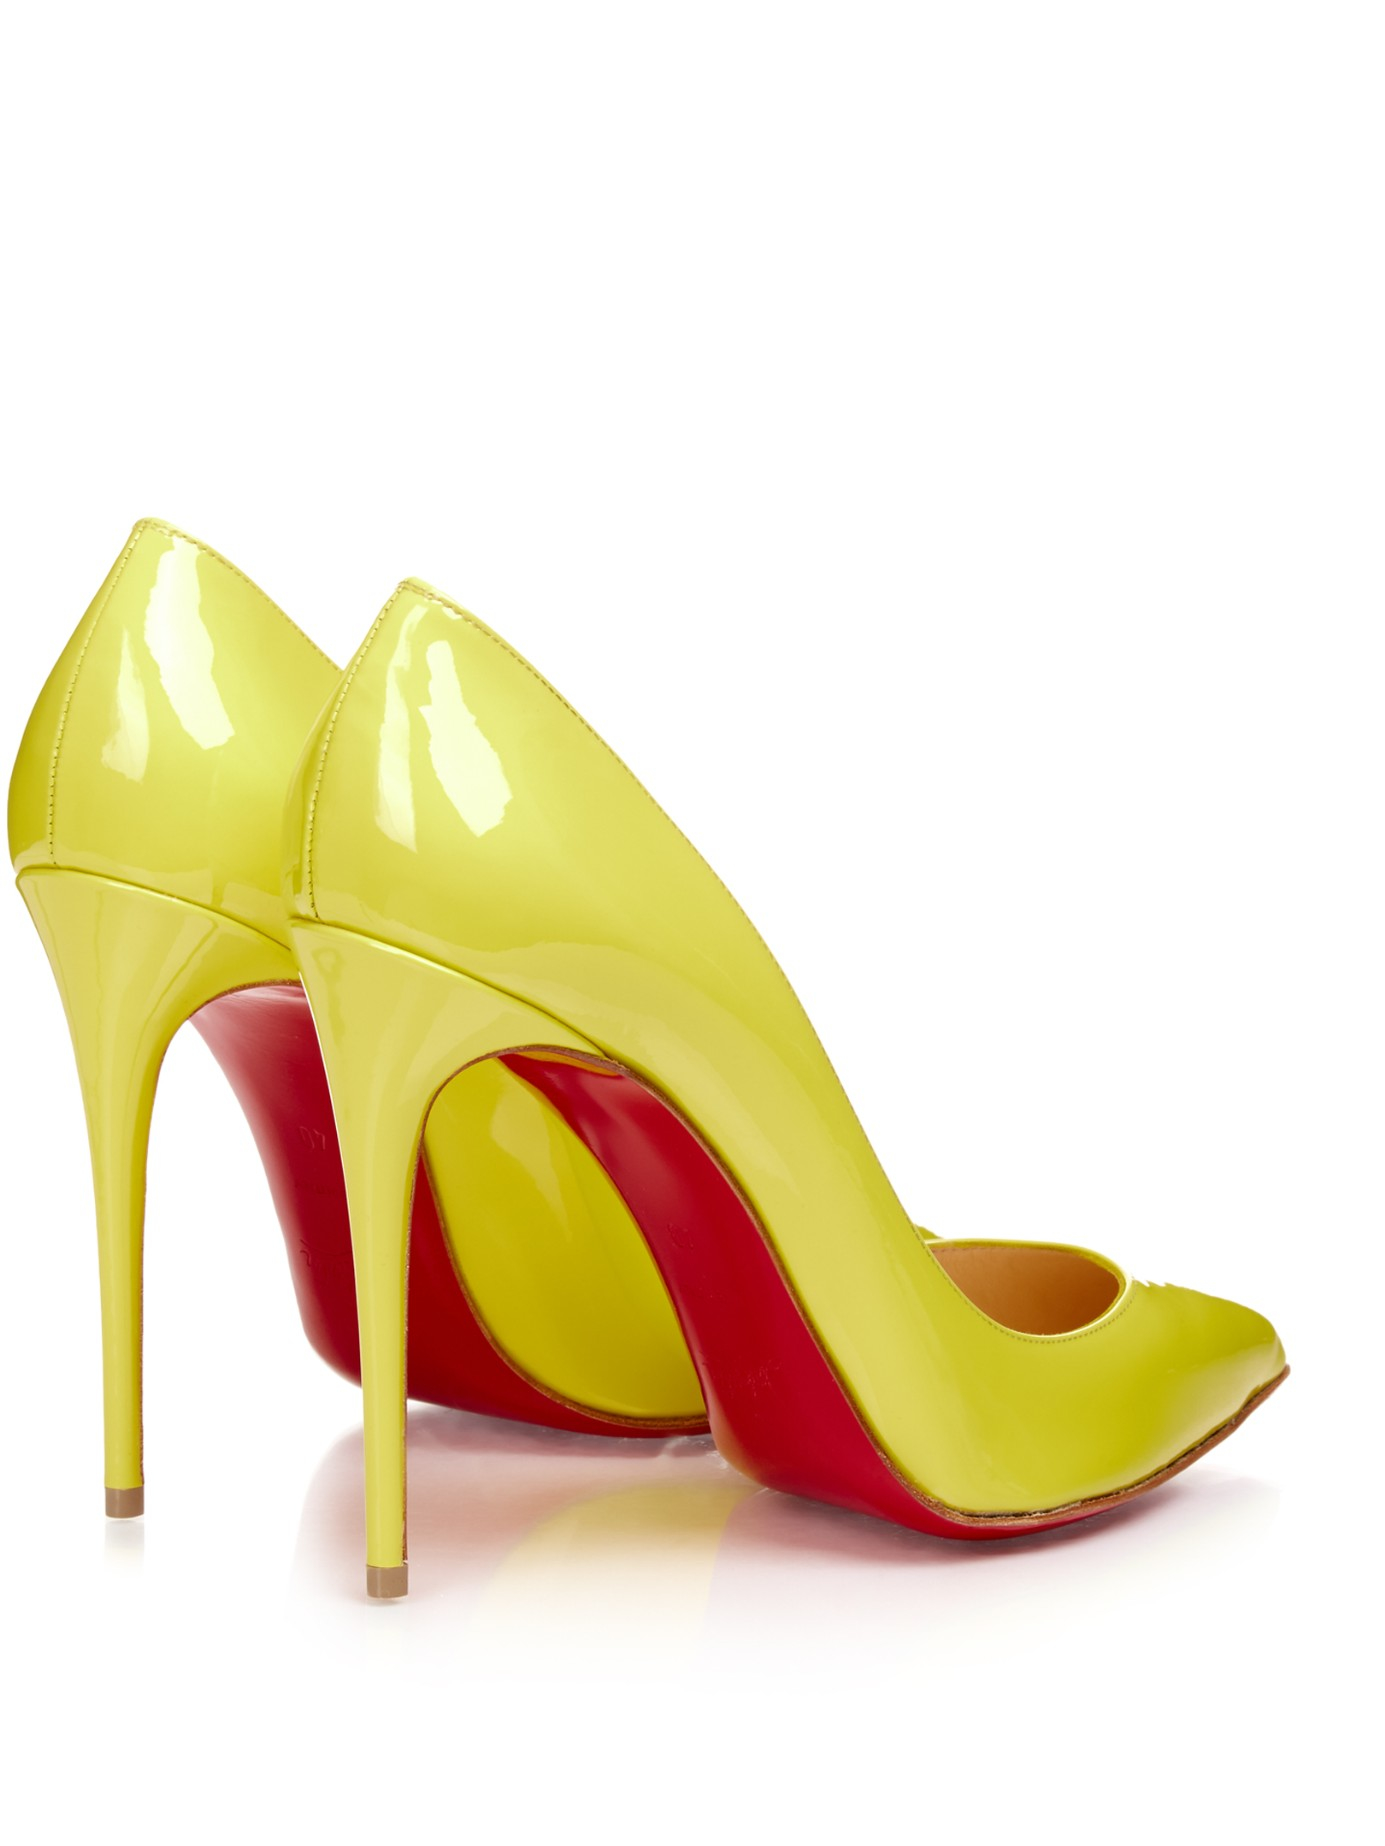 Christian Louboutin Pigalle Follies 100mm Patent-leather Pumps in Yellow |  Lyst